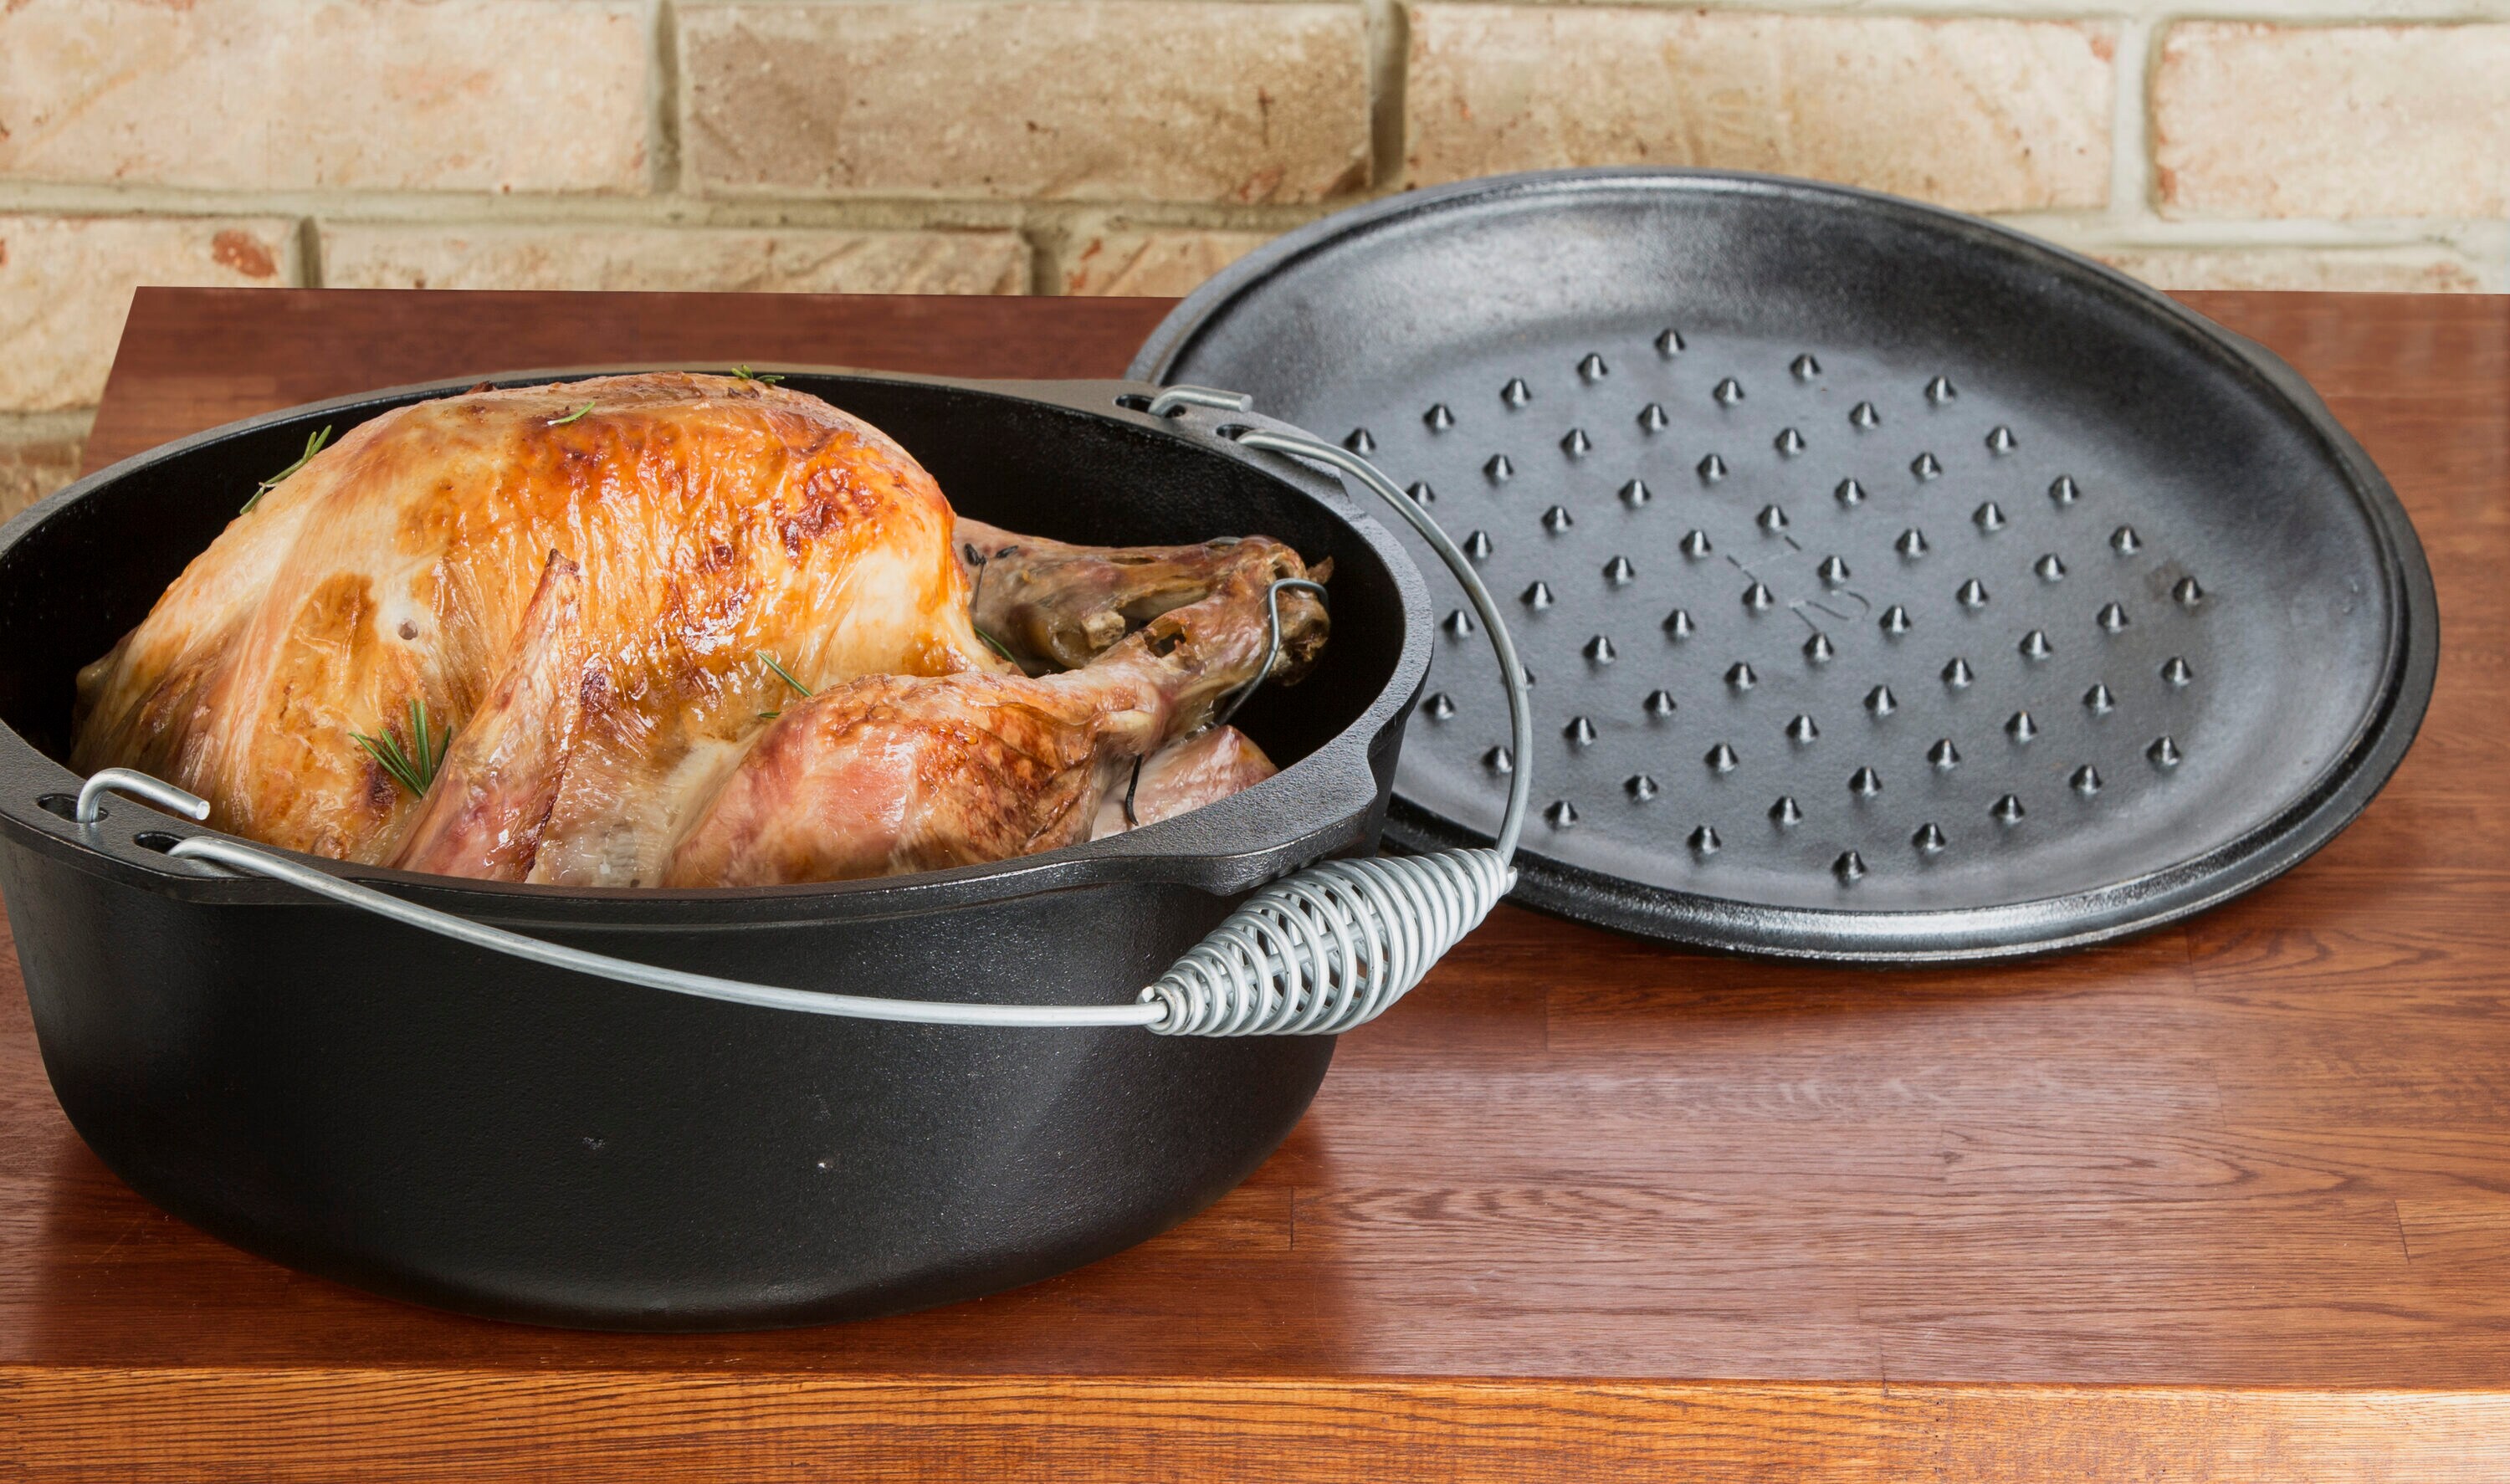 Lodge 12 Inch Cast Iron Lid. Classic 12-Inch Cast Iron Cover Lid with  Handle and Interior Basting Tips. 